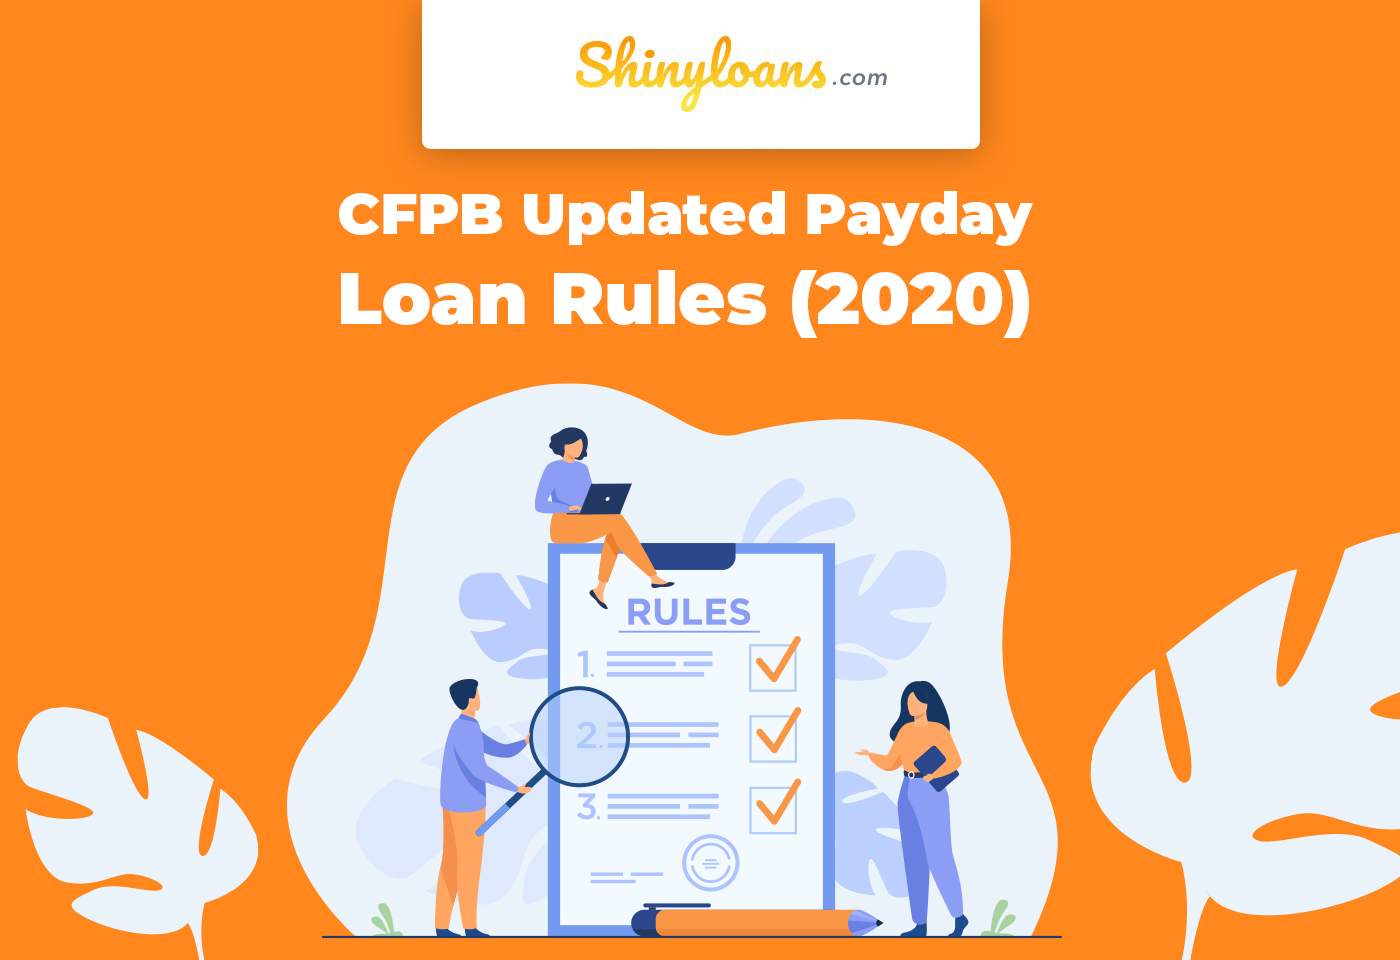 CFPB Updated Payday Loan Rules (2020)